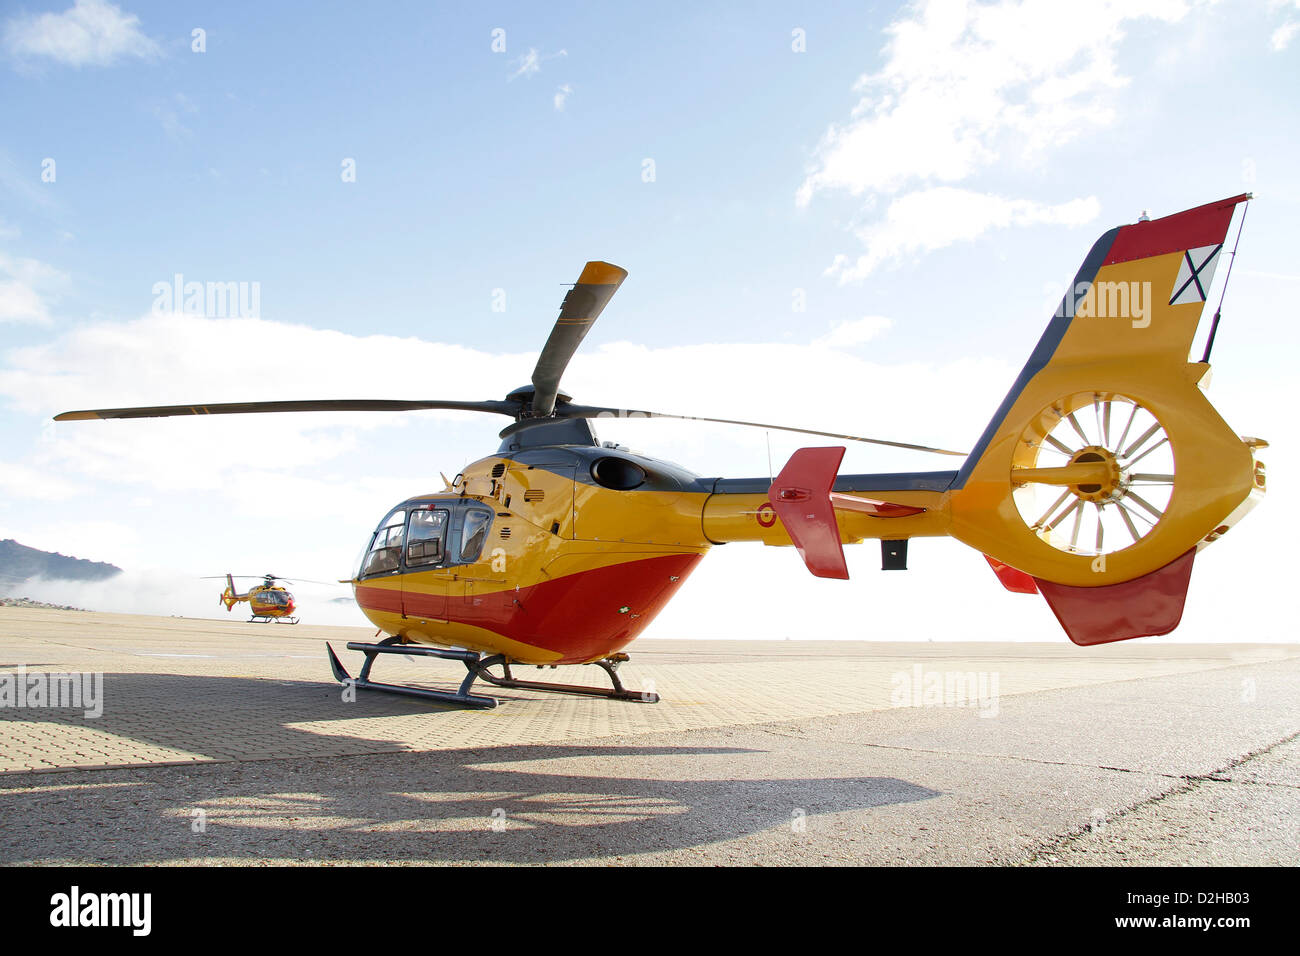 Helicopter rescue ready for emergencies Stock Photo